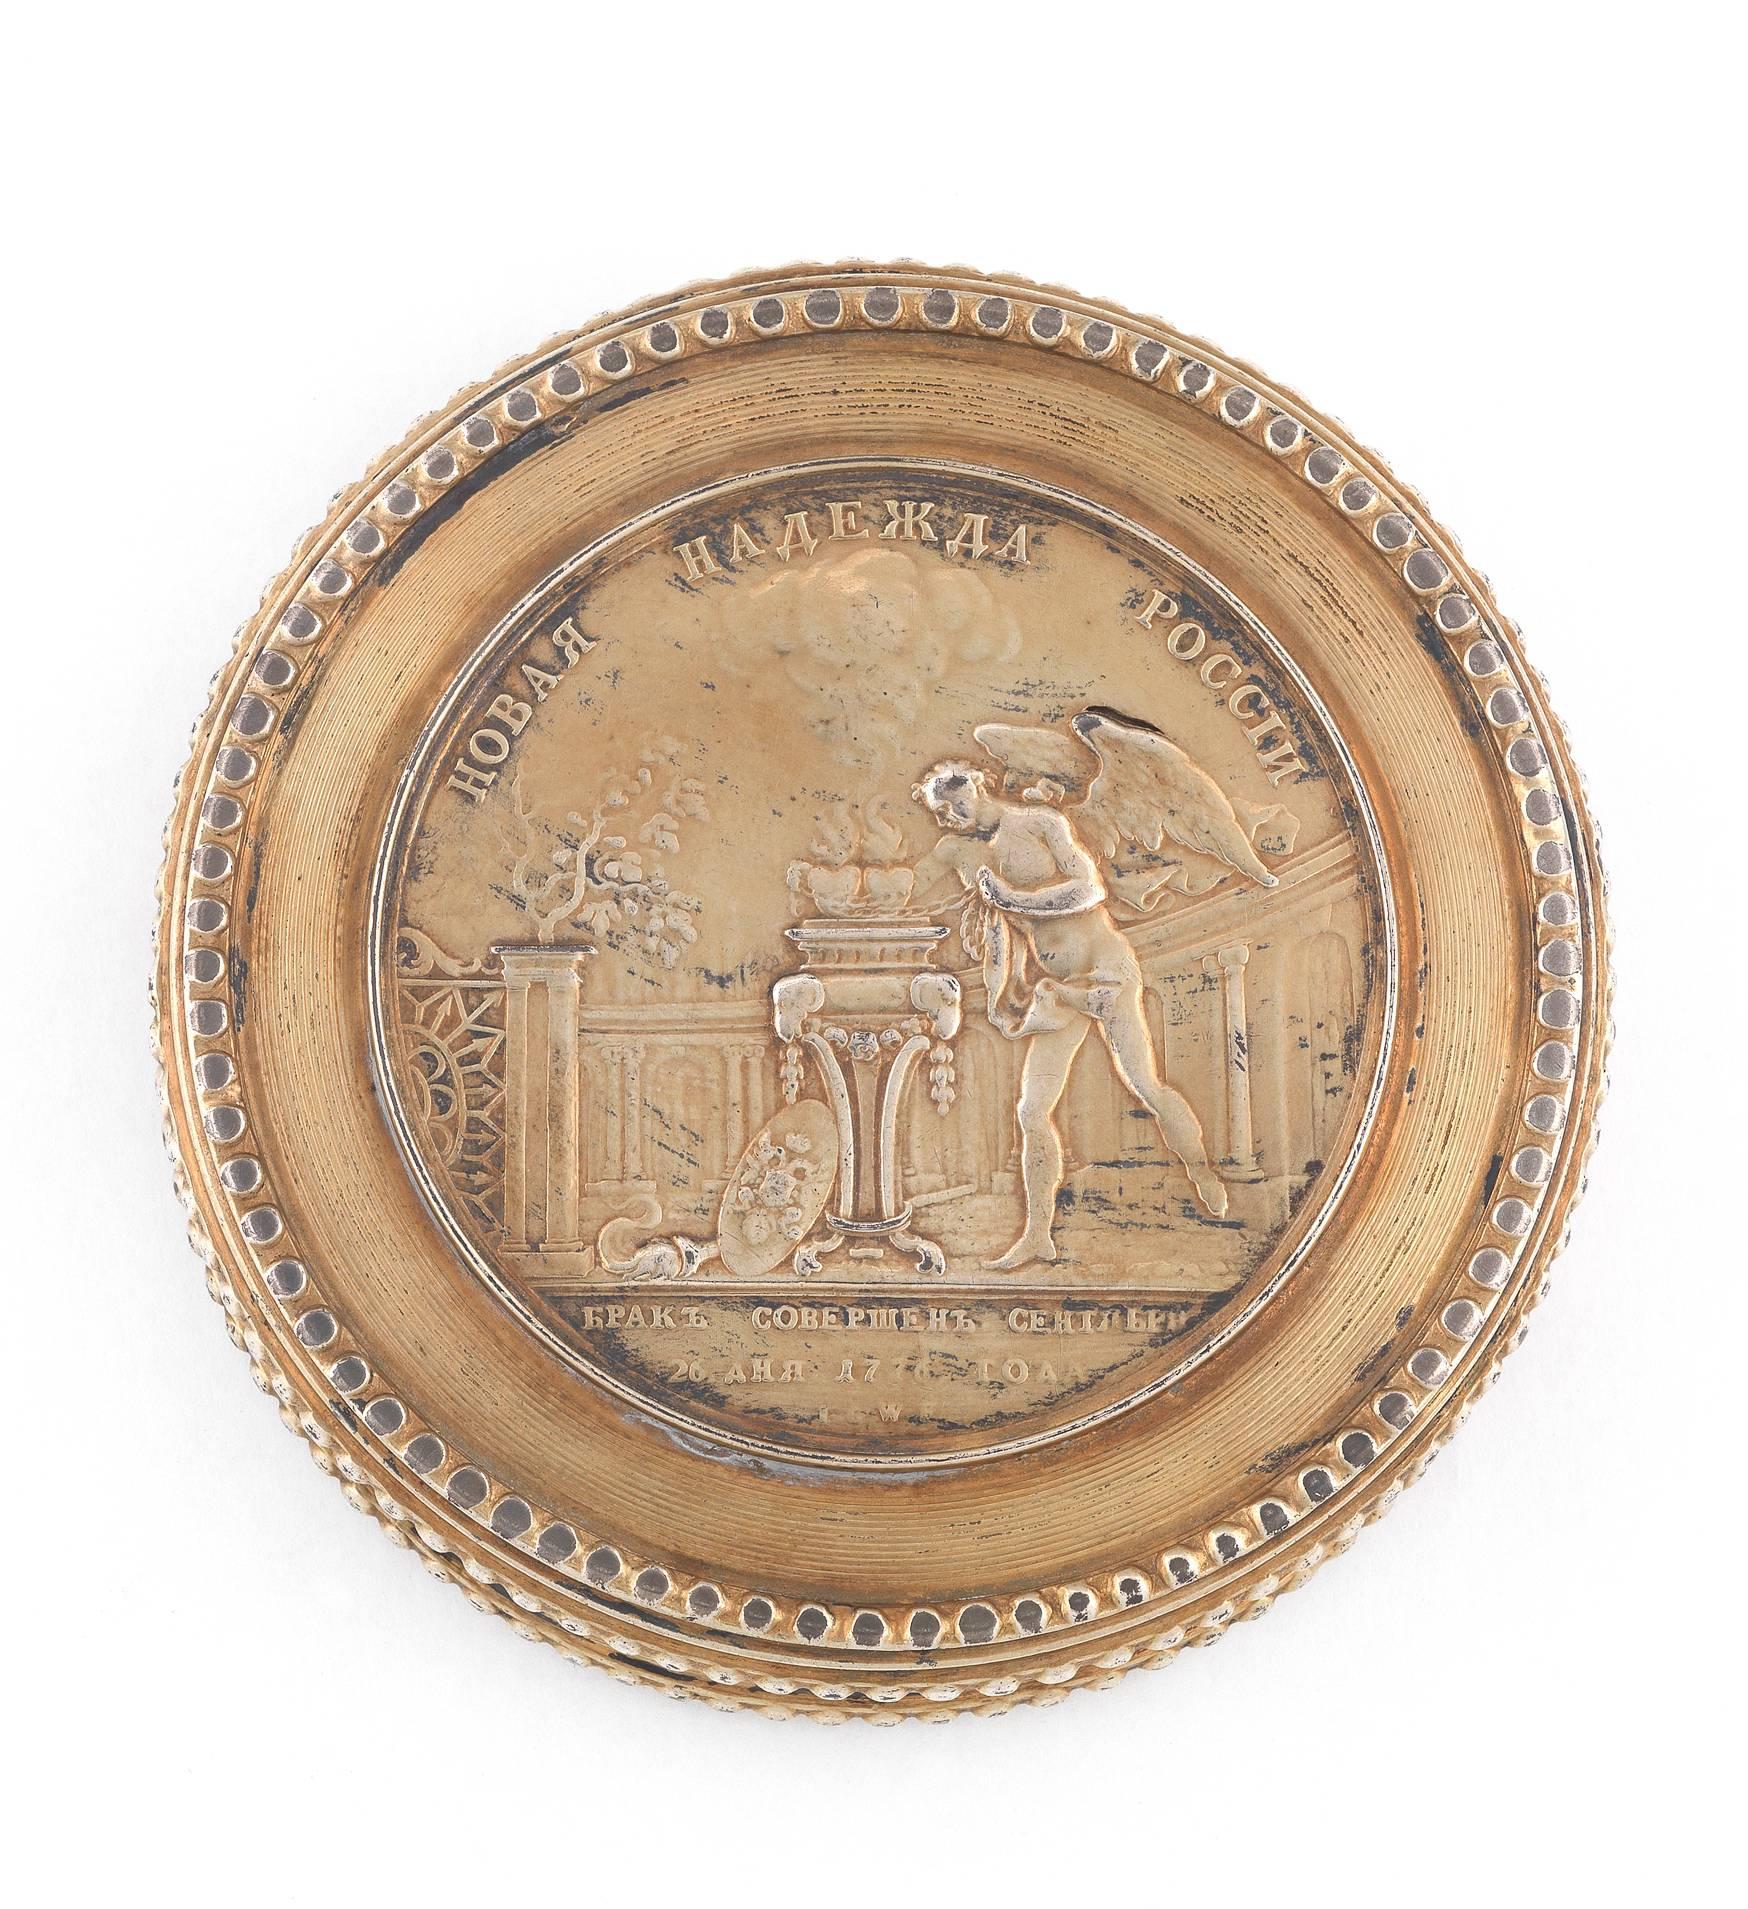 

Circular, the lid applied with a medal by Jaeger commemorating the 1776 marriage of Grand Duke Paul and Sophia Dorothea von Württemberg, the base decorated with a allegory of War and Art, husk borders
diameter: 8.5cm, 3 3/8 in

Grand Duke Paul,